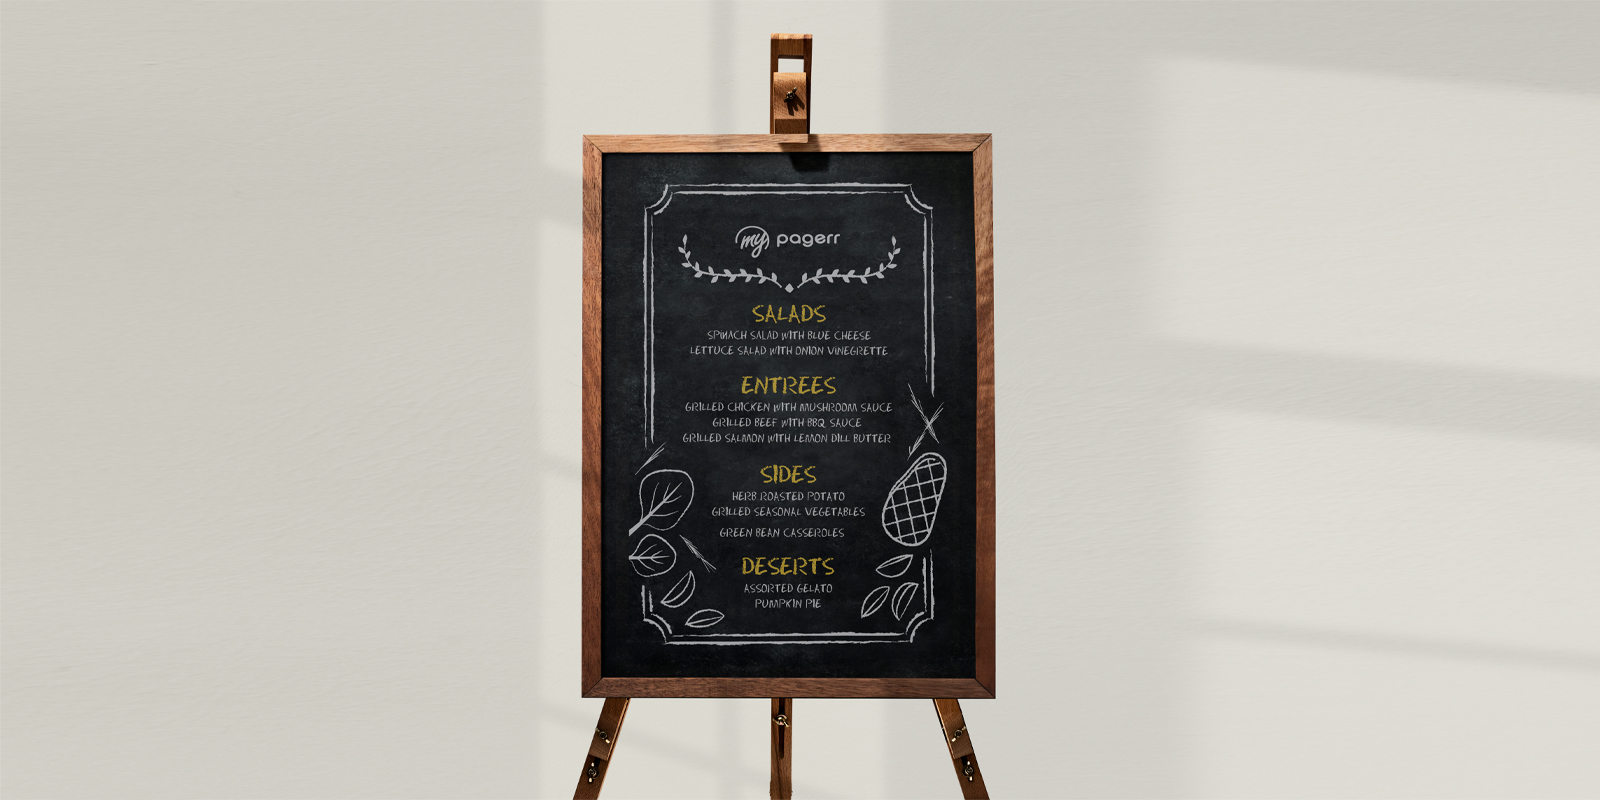 Chalkboard signs in Newcastle - Print with Pagerr